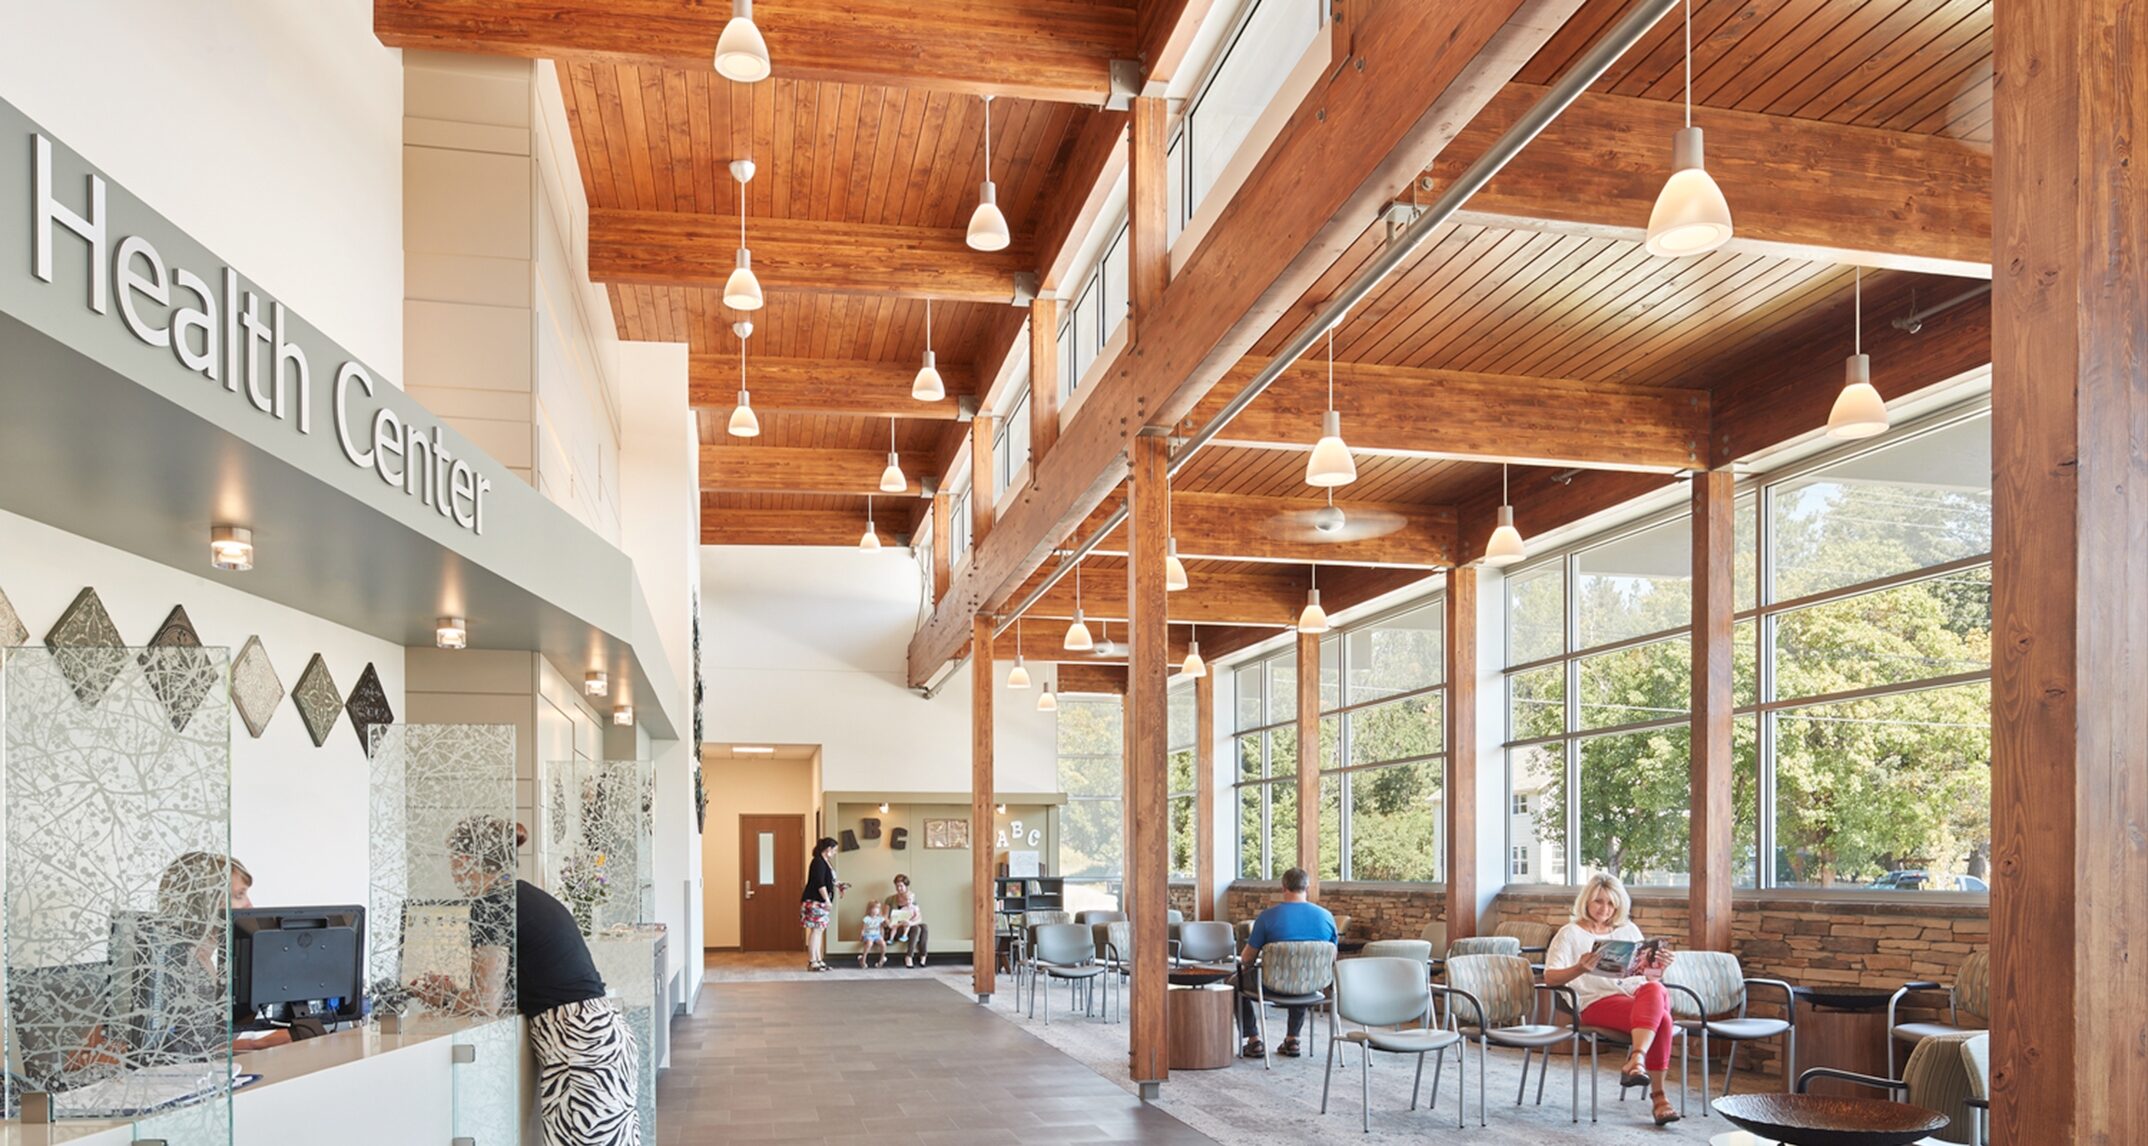 Large windows in the lobby provide a visual connection to nature, while the deliberate use of finishes and patterns serve to mimic the natural environment. Newport Hospital Health Center – NAC Architecture